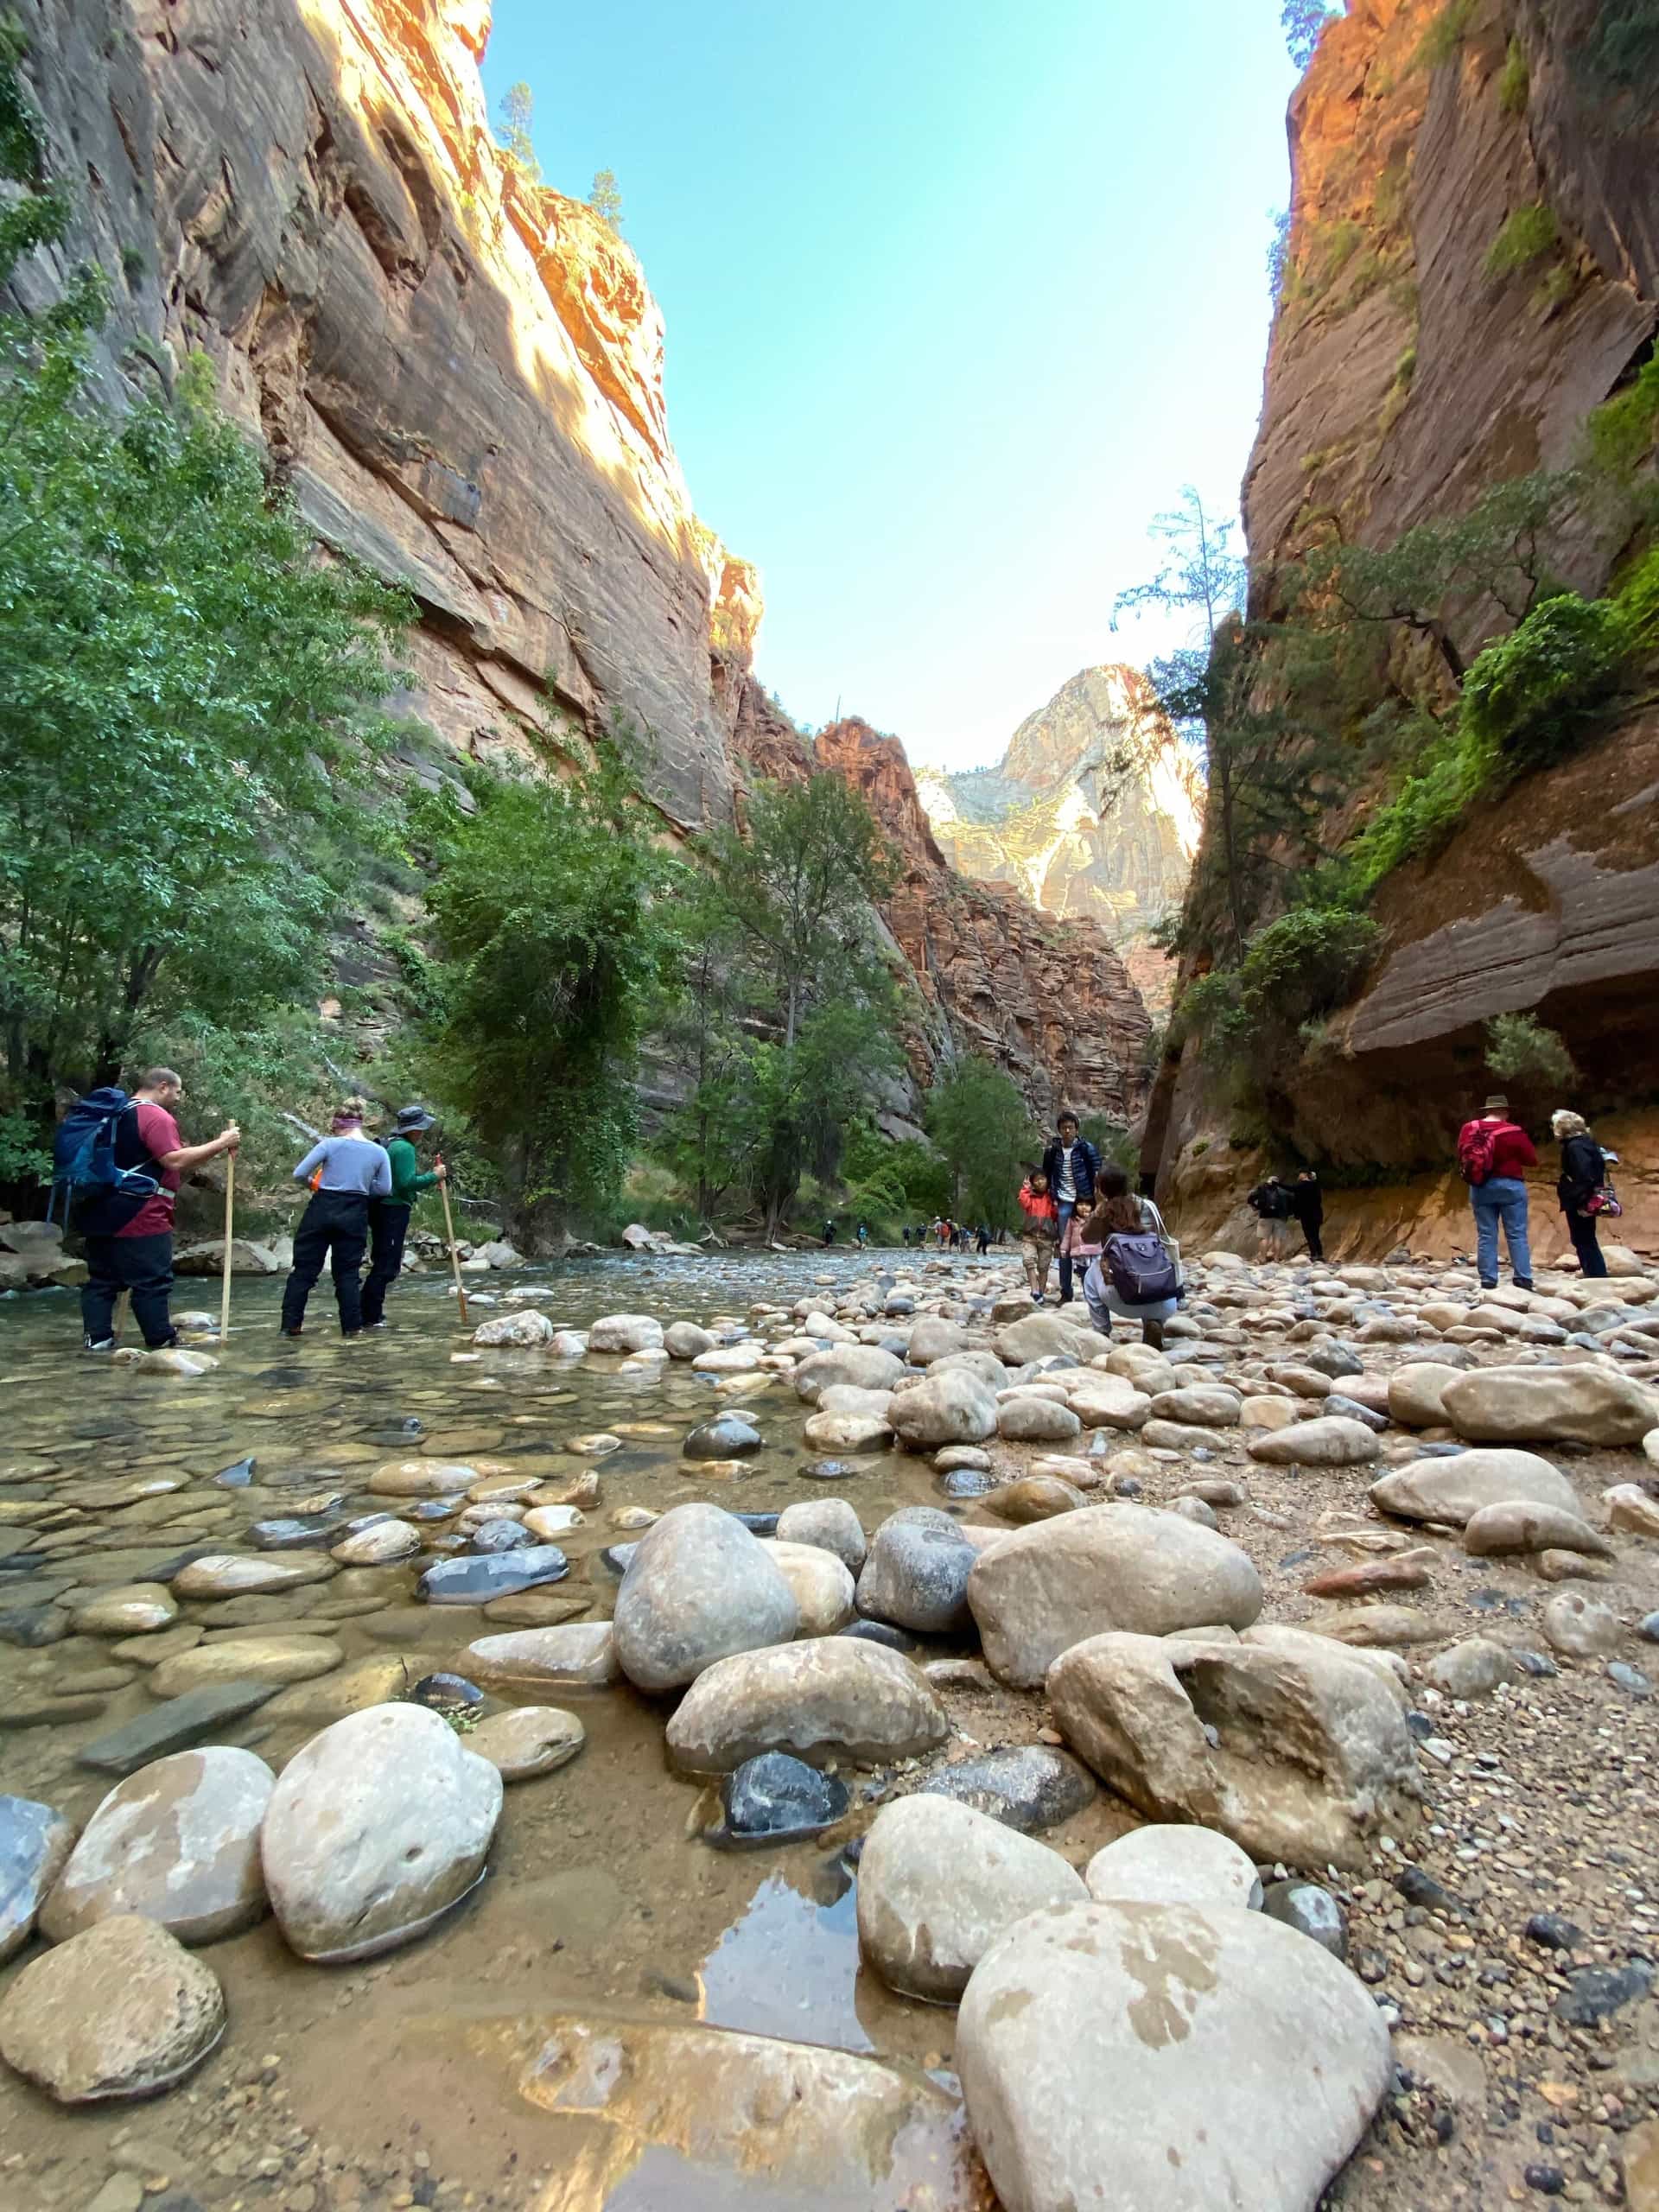 Getting our first peek at The Narrows hike through the Virgin River